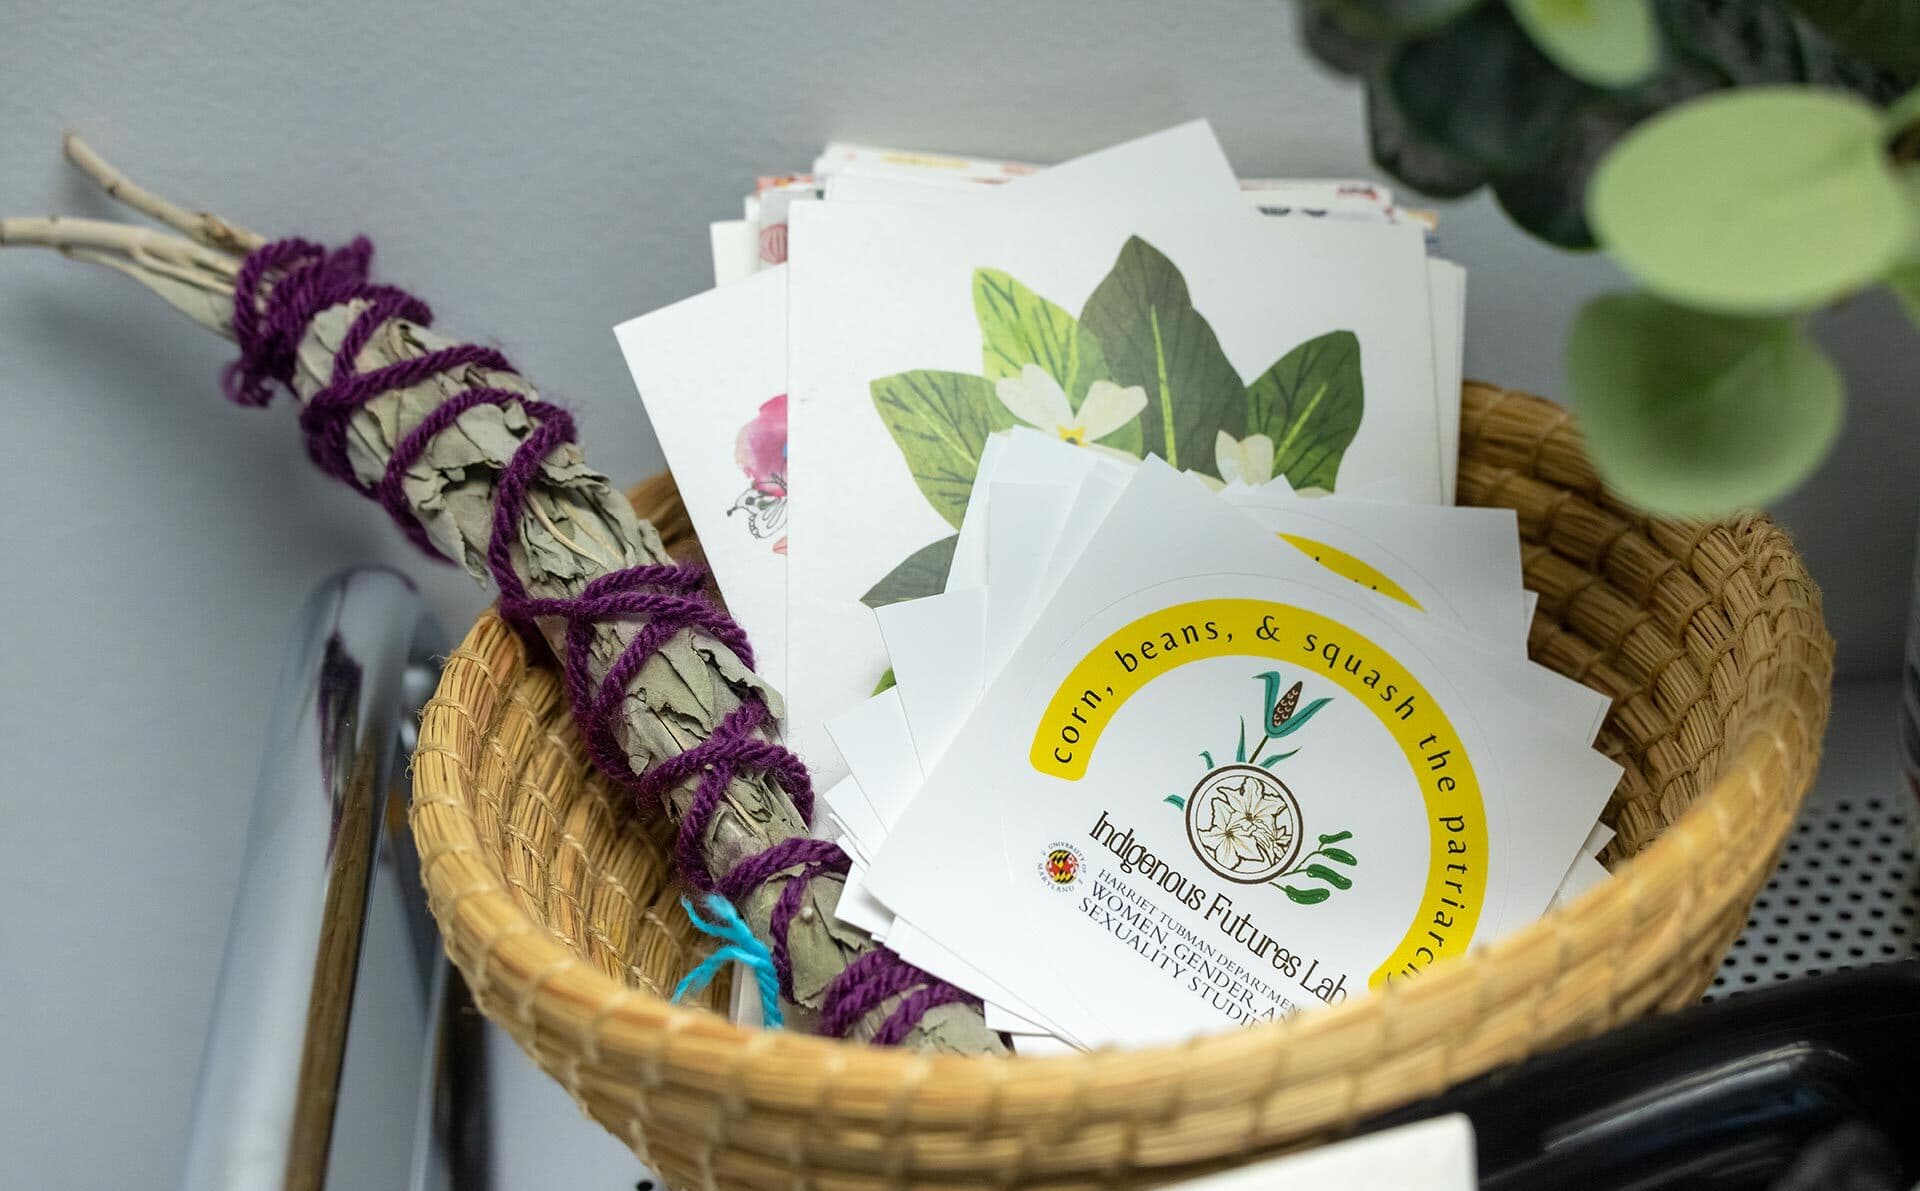 bundle of sage, cards that say "corn, beans, squash and the patriarchy" in a woven basket